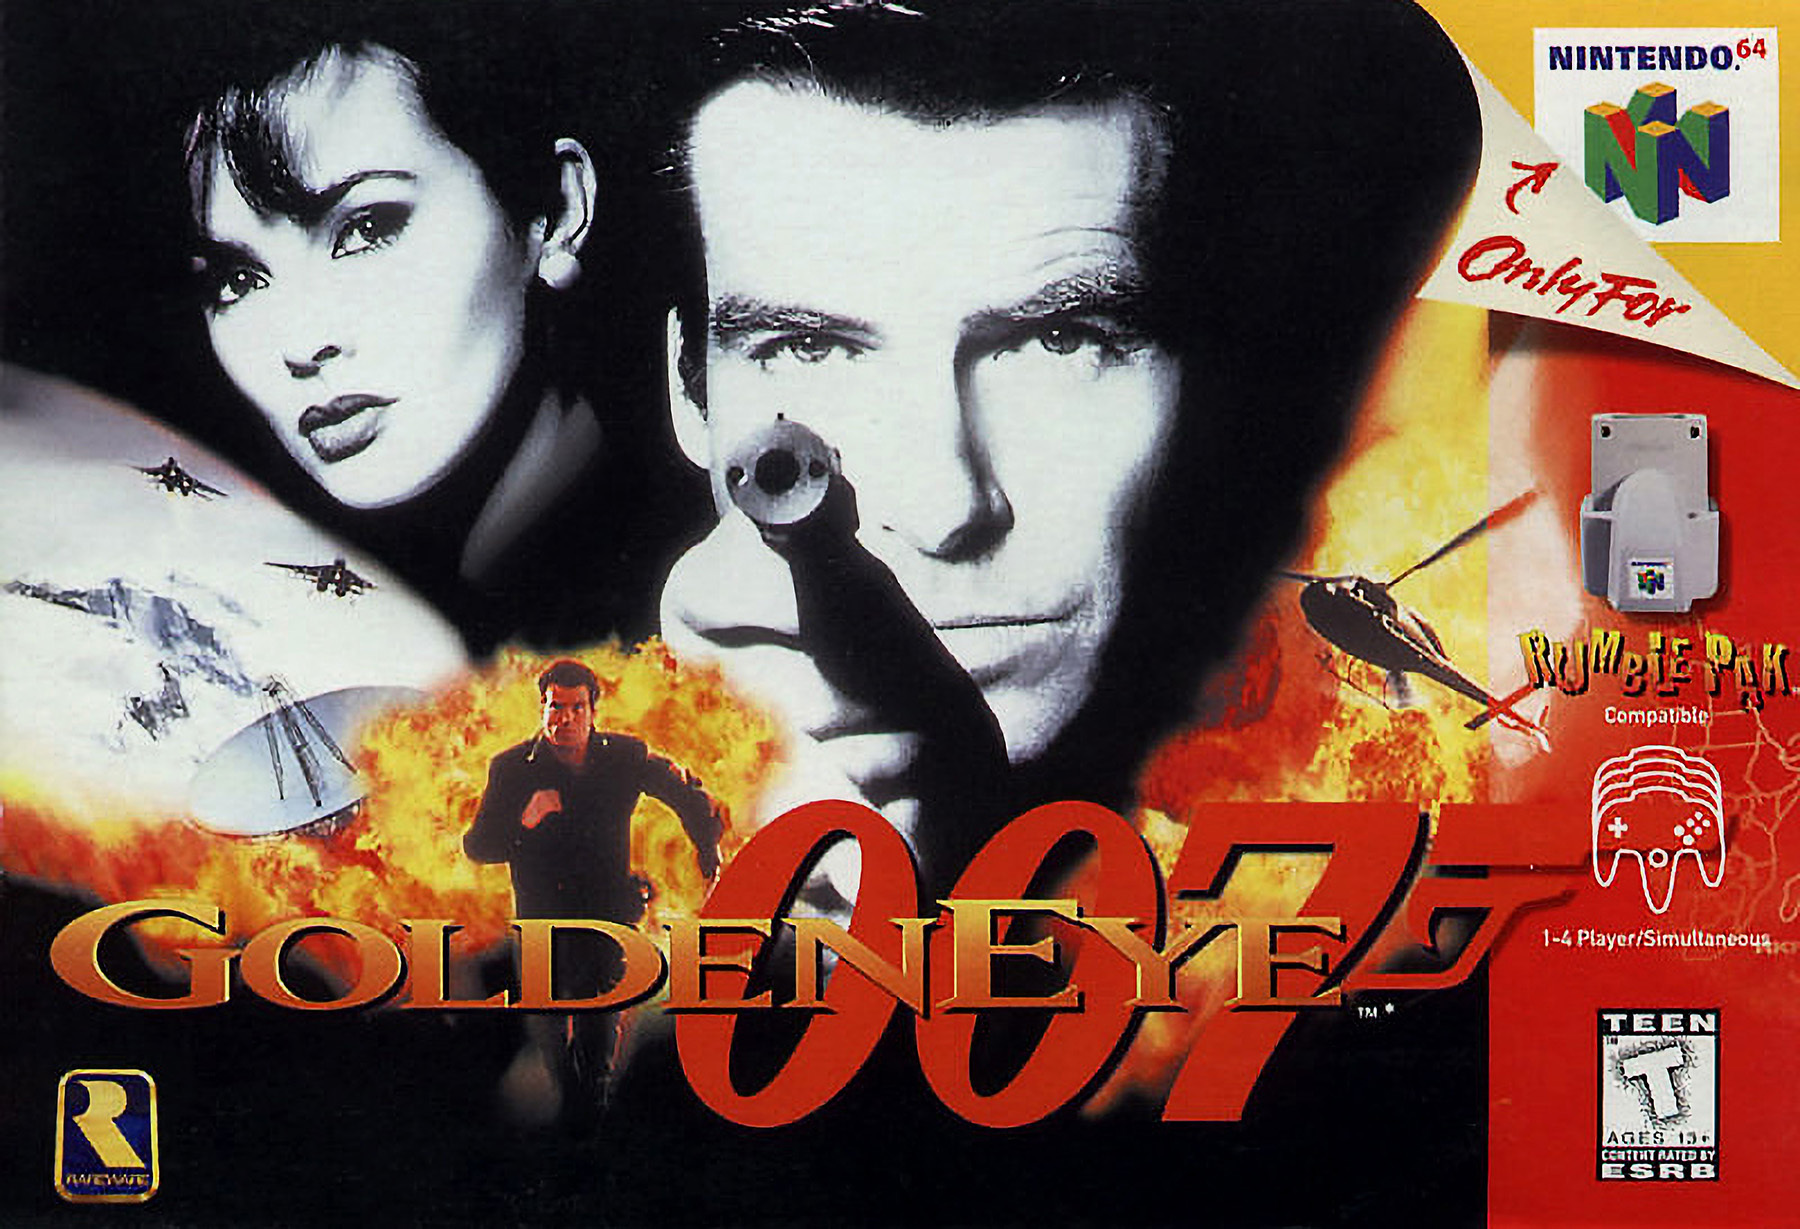 goldenera-is-a-loving-if-muddled-tribute-to-goldeneye-007-or-engadget